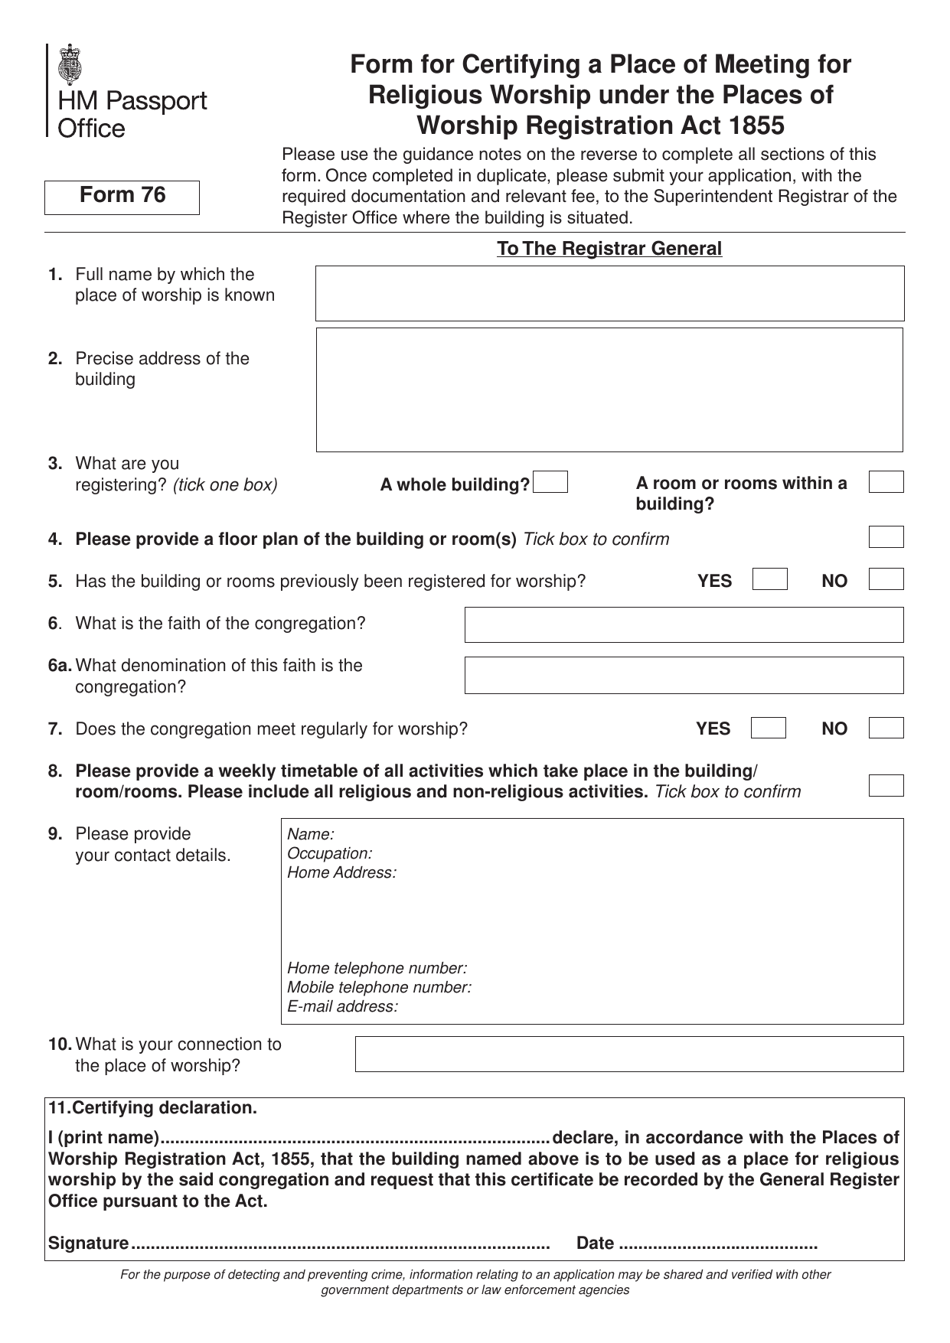 Form 76 Form for Certifying a Place of Meeting for Religious Worship Under the Places of Worship Registration Act 1855 - United Kingdom, Page 1